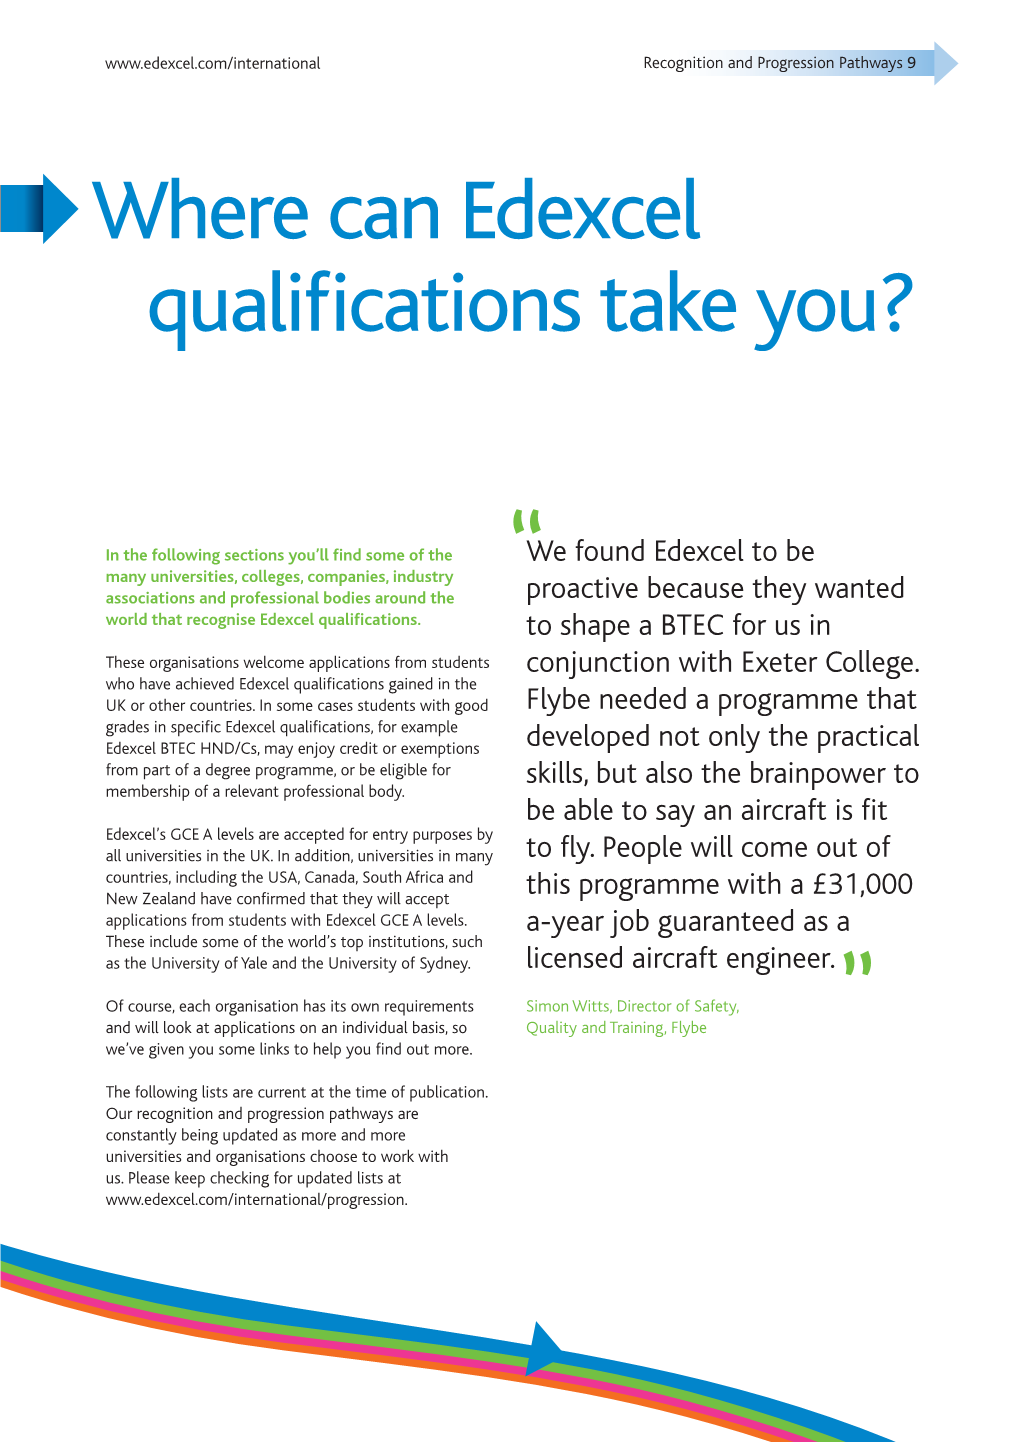 Where Can Edexcel Qualifications Take You?